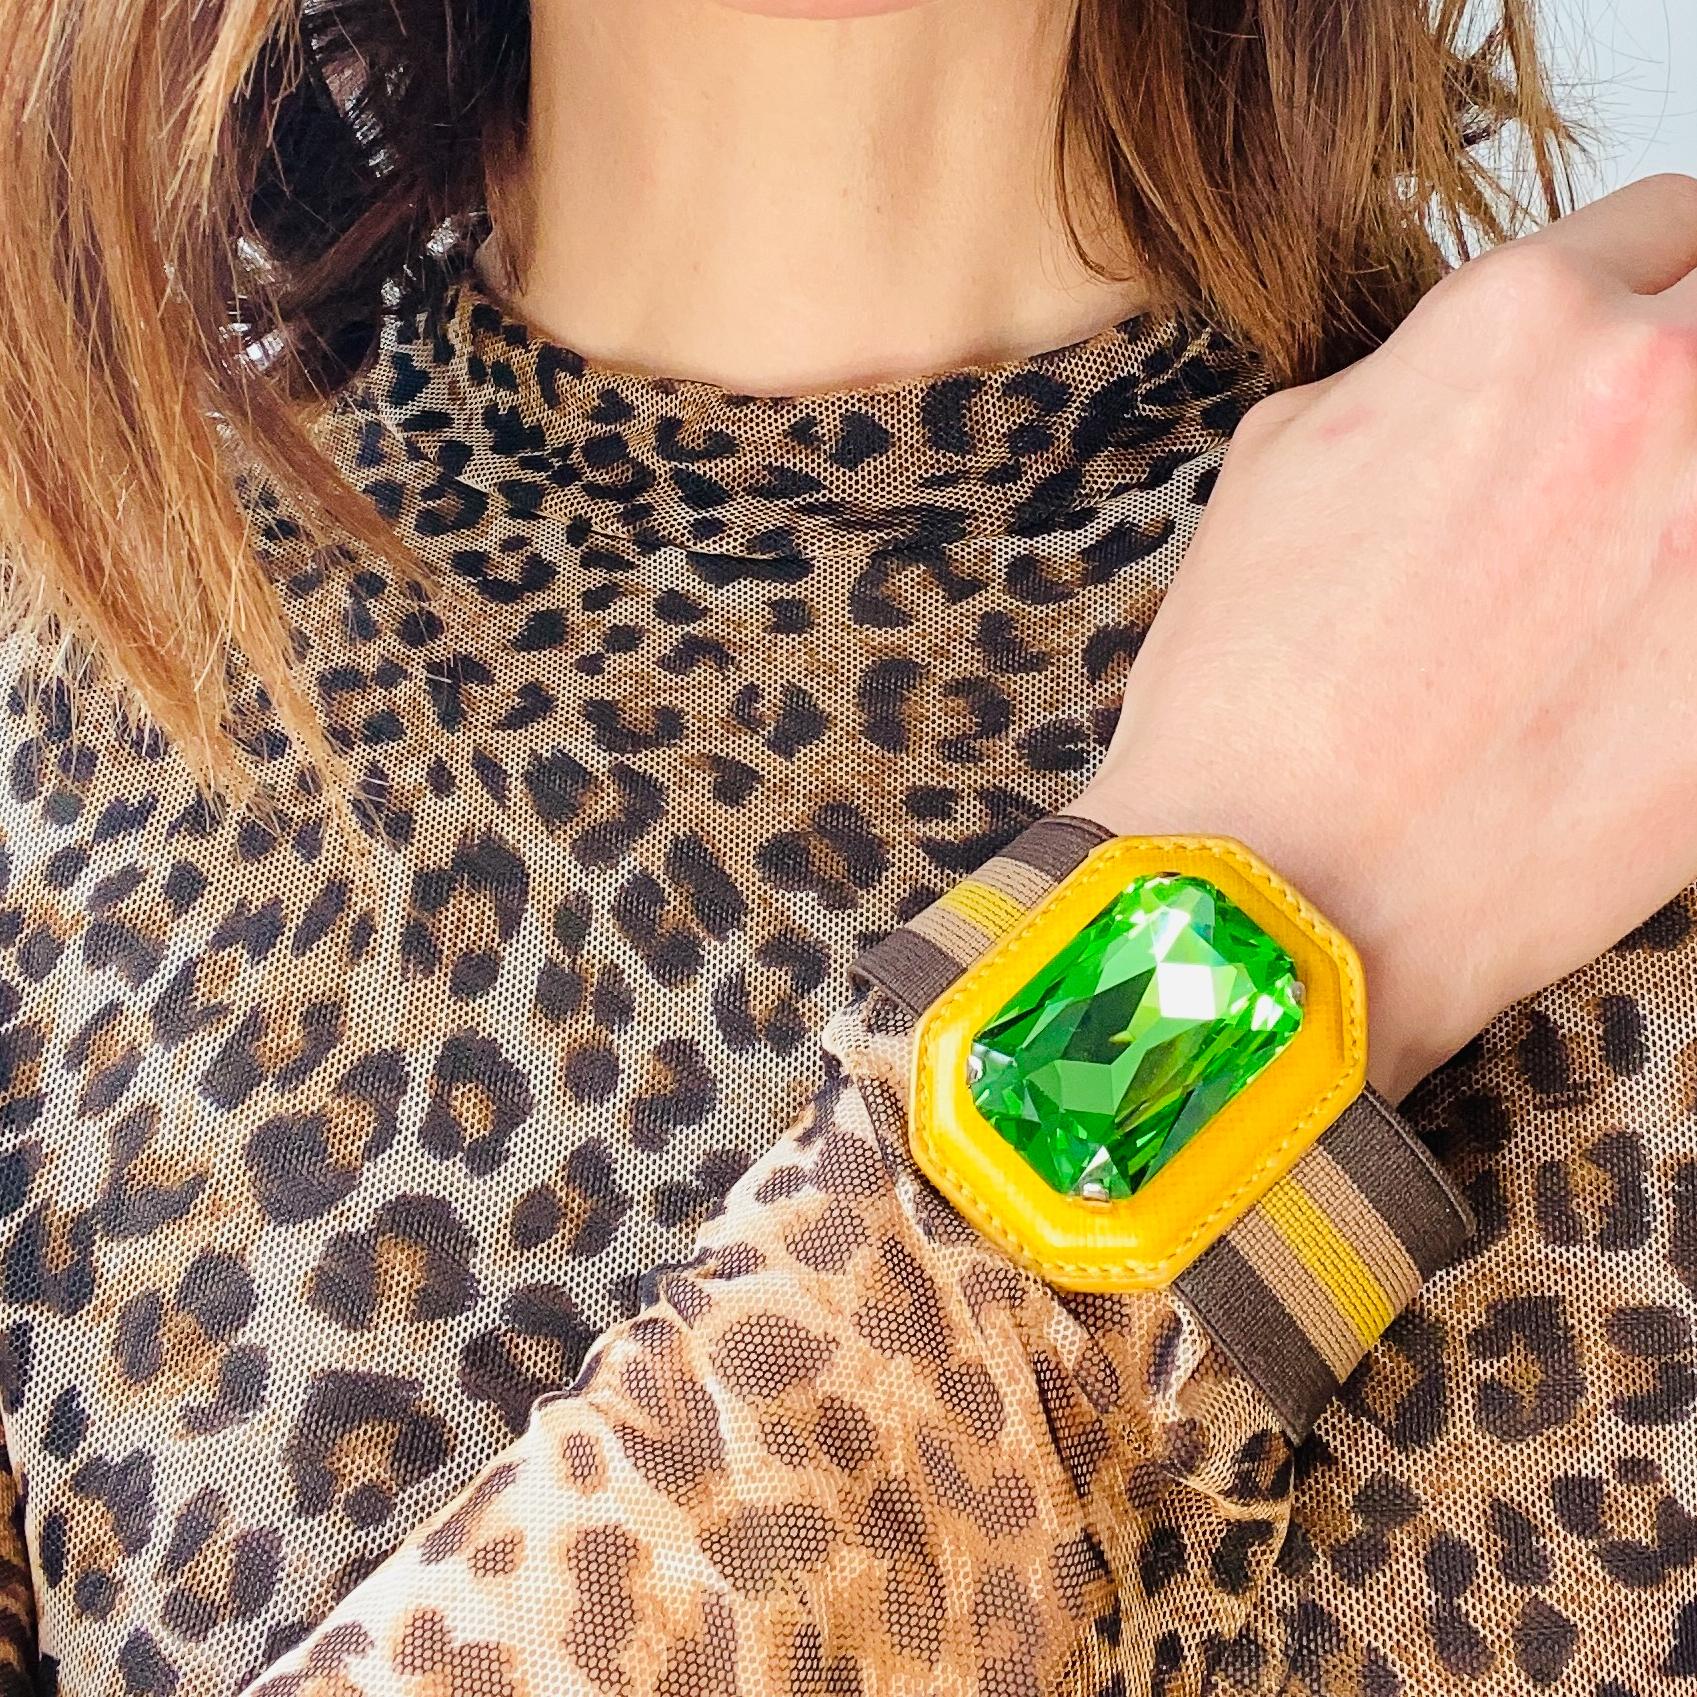 Prada Vintage Y2K Bracelet

Super cool statement cuff bracelet from Prada

Detail
-Made in Italy in the 2000s
-Huge vibrant green stone set within yellow saffiano leather
-Complete with box
-Adjustable wristband

Size & Fit
-Approx length 7 inches /